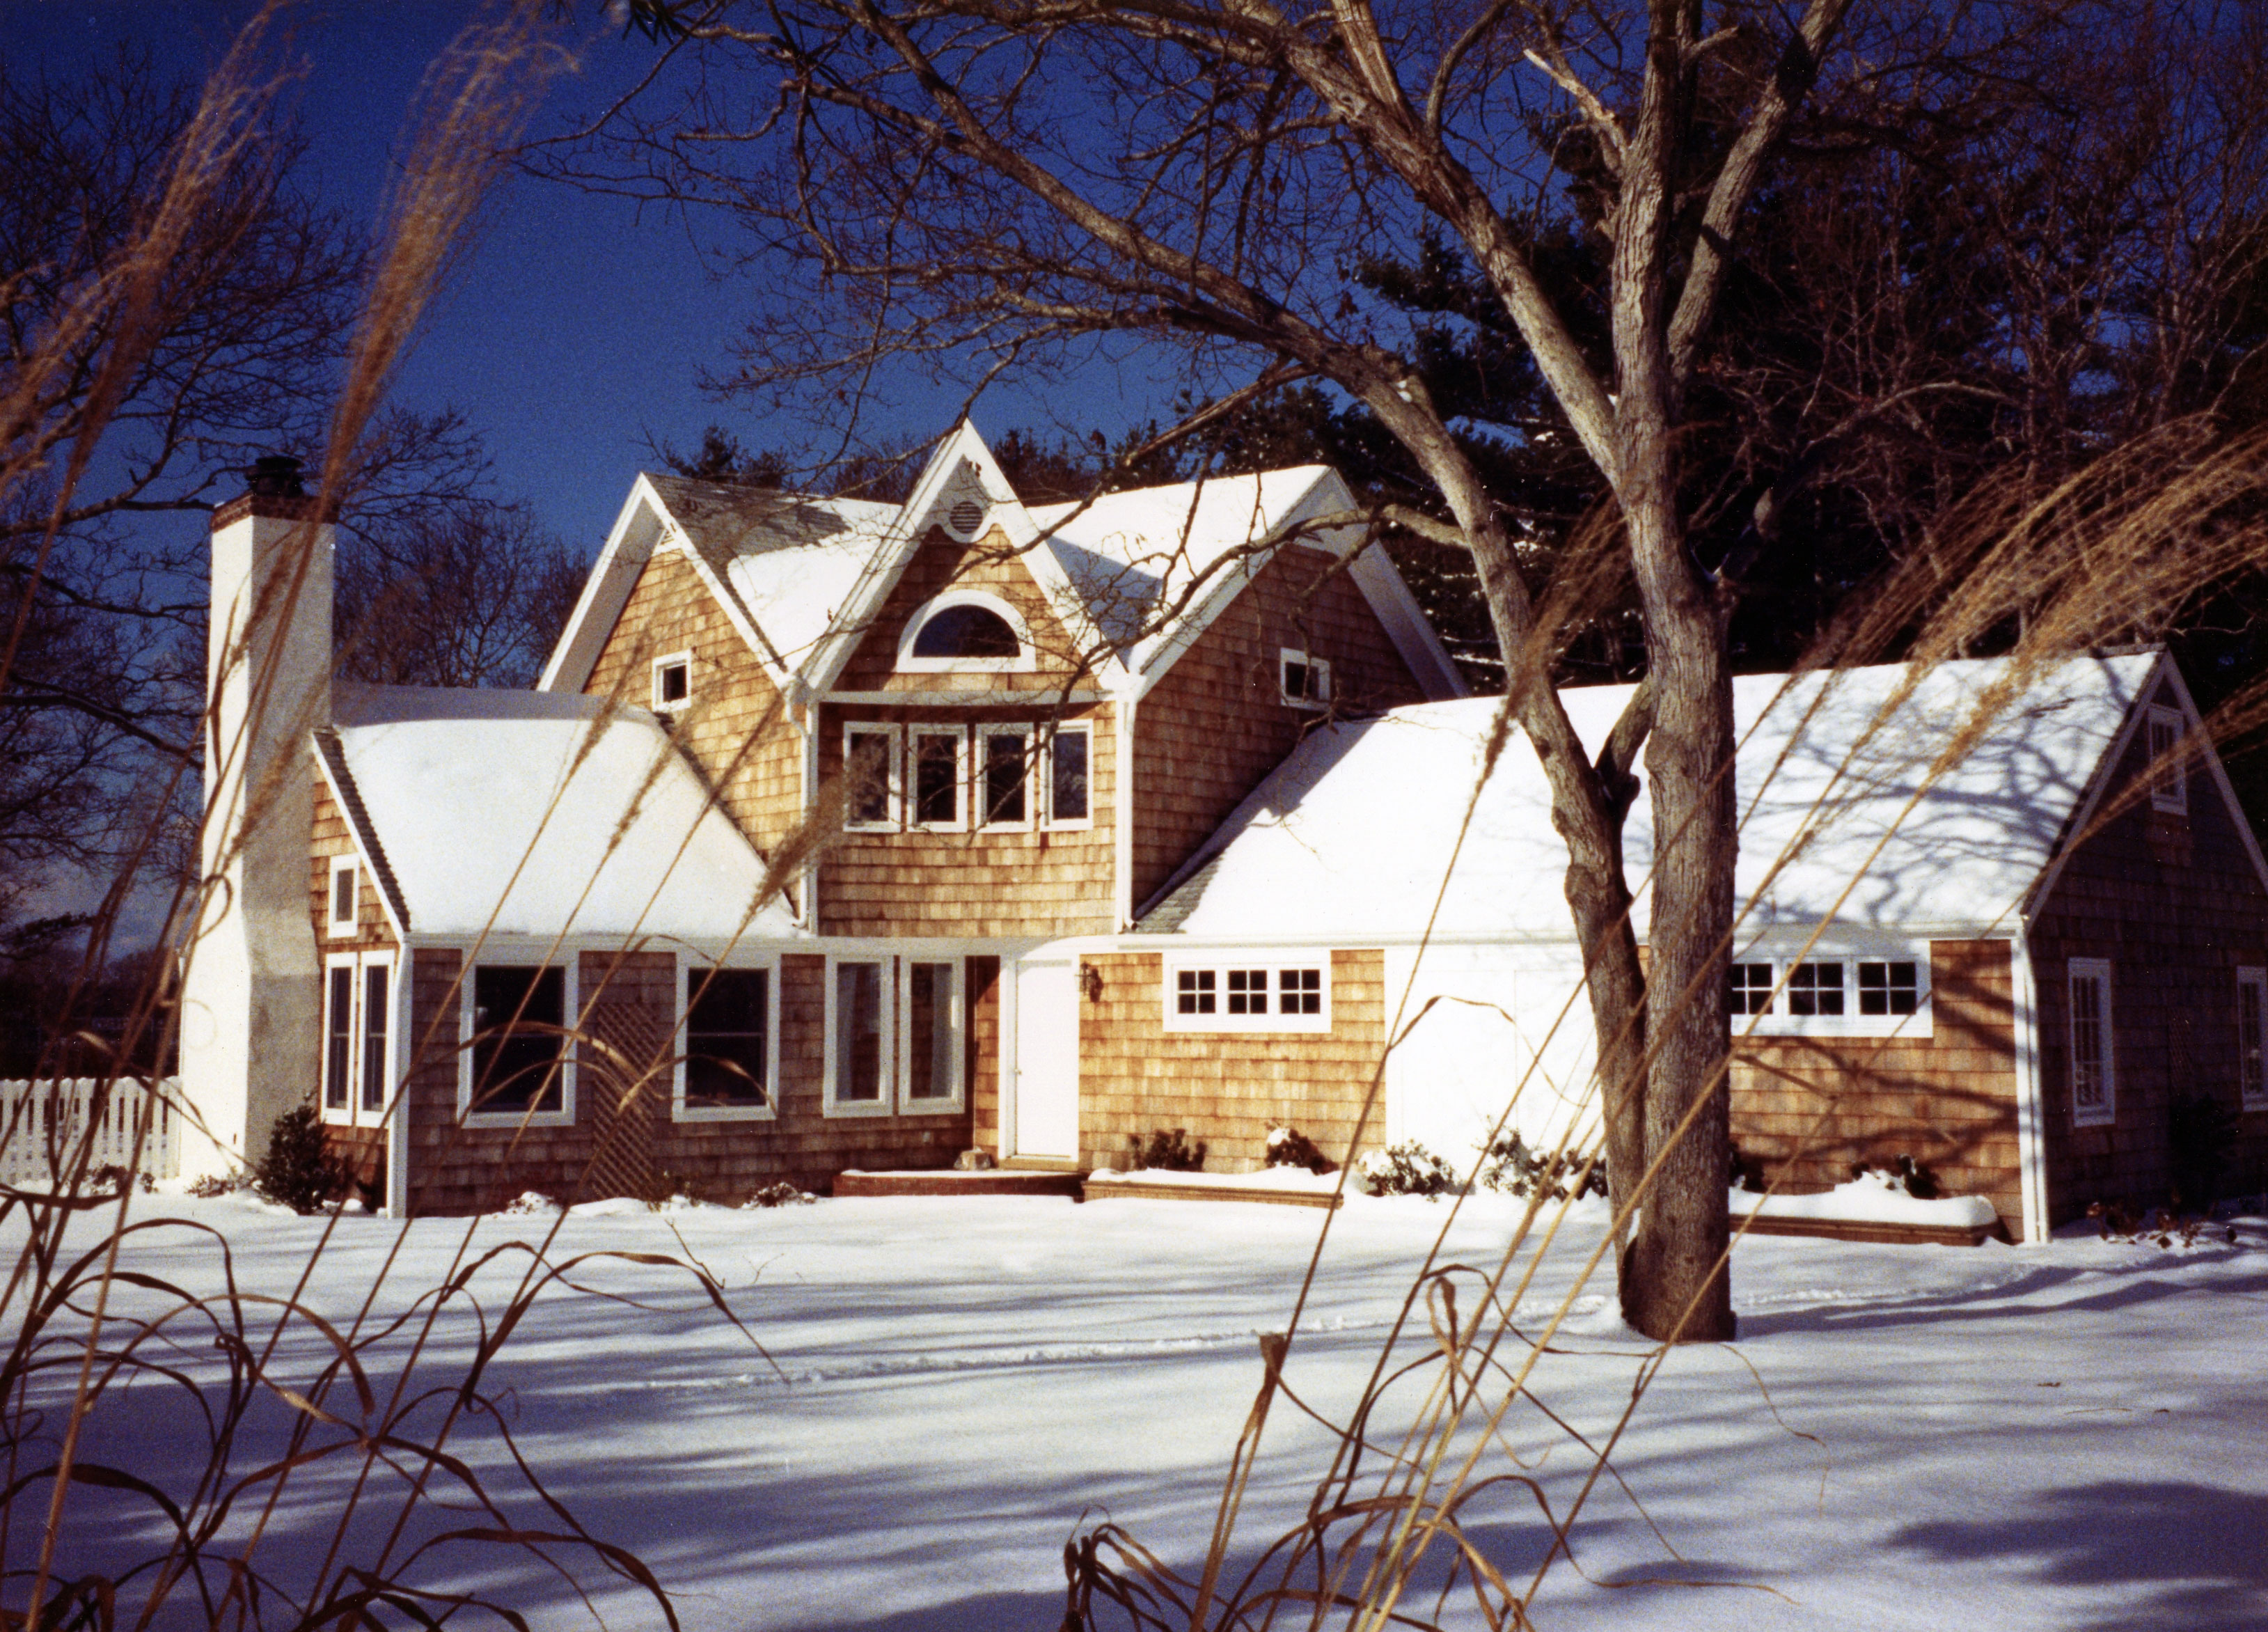 A snow covered house in East Hampton Long Island, New York